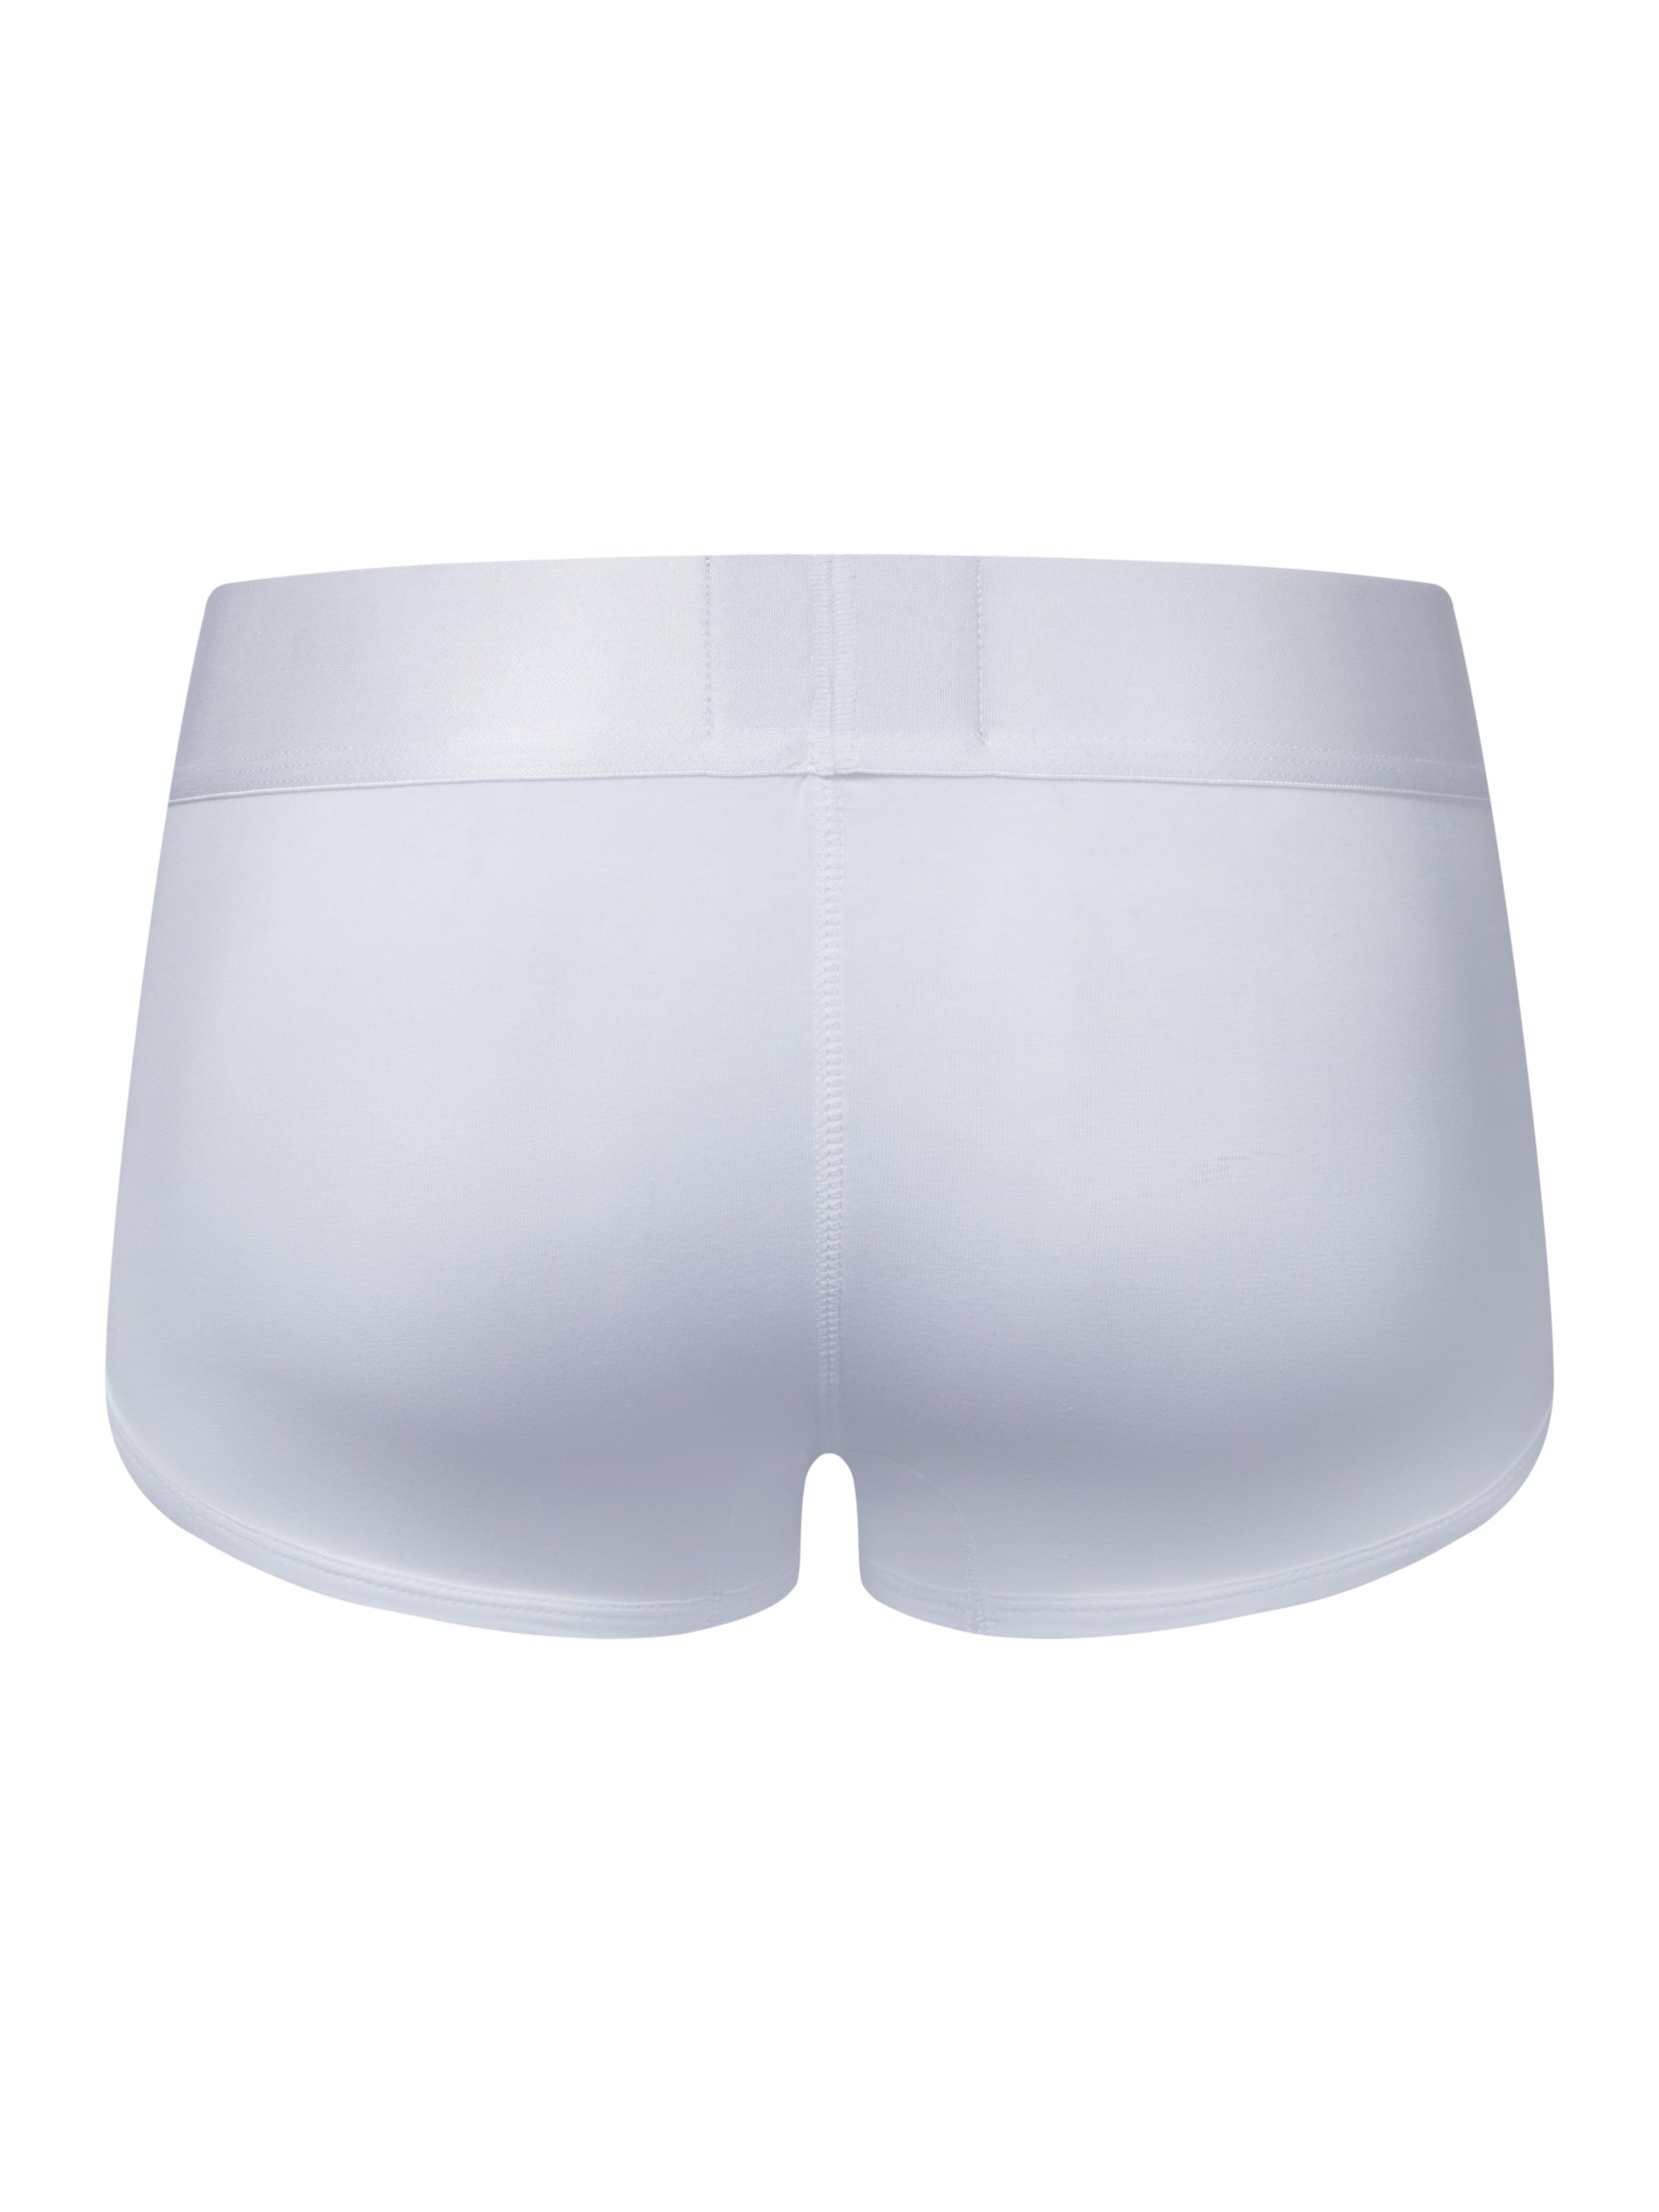 A back product photo showing Phantom Boxers in white.